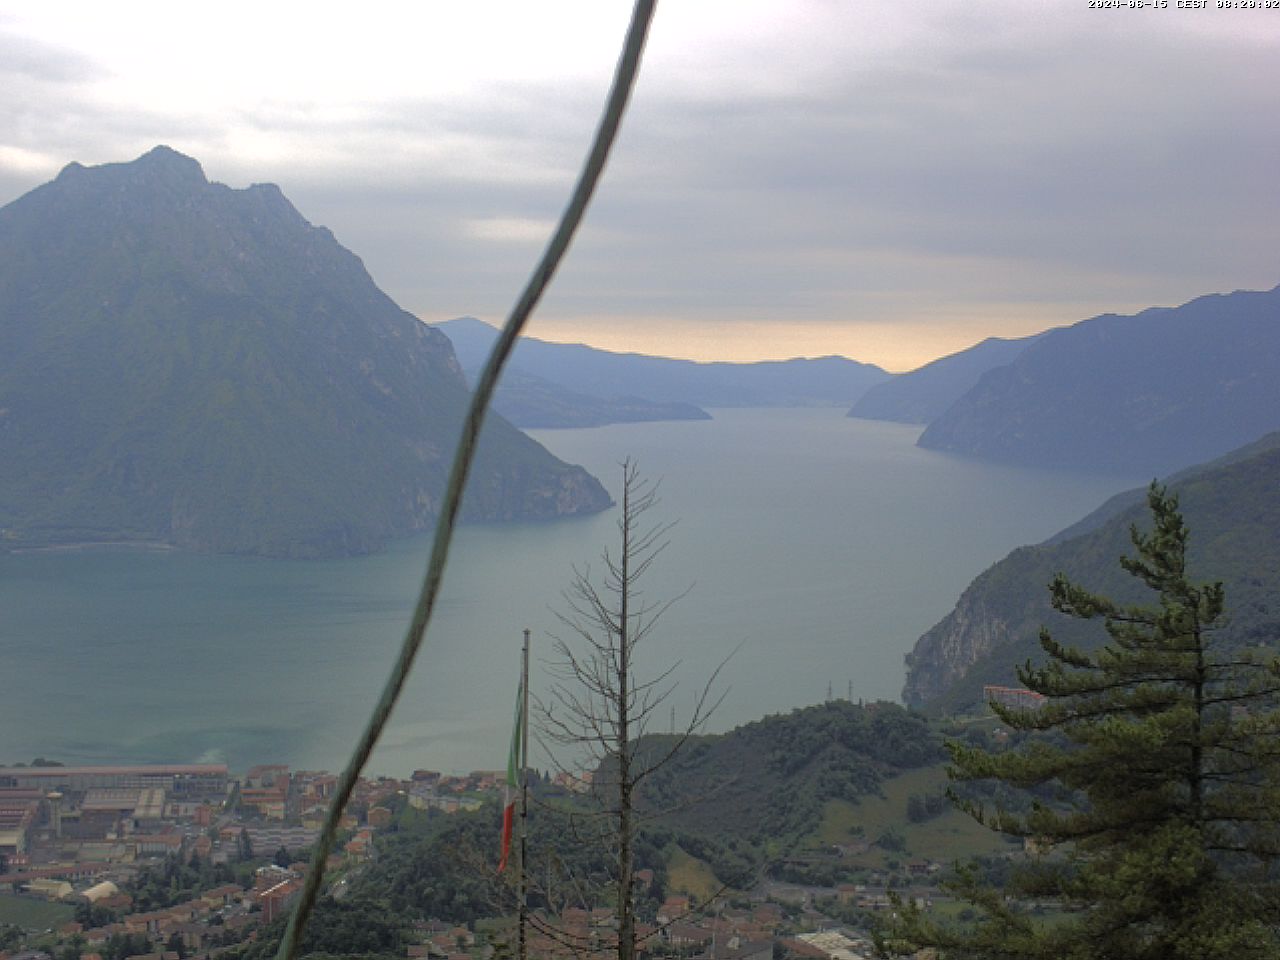 Lovere (Lac d'Iseo) Me. 08:29